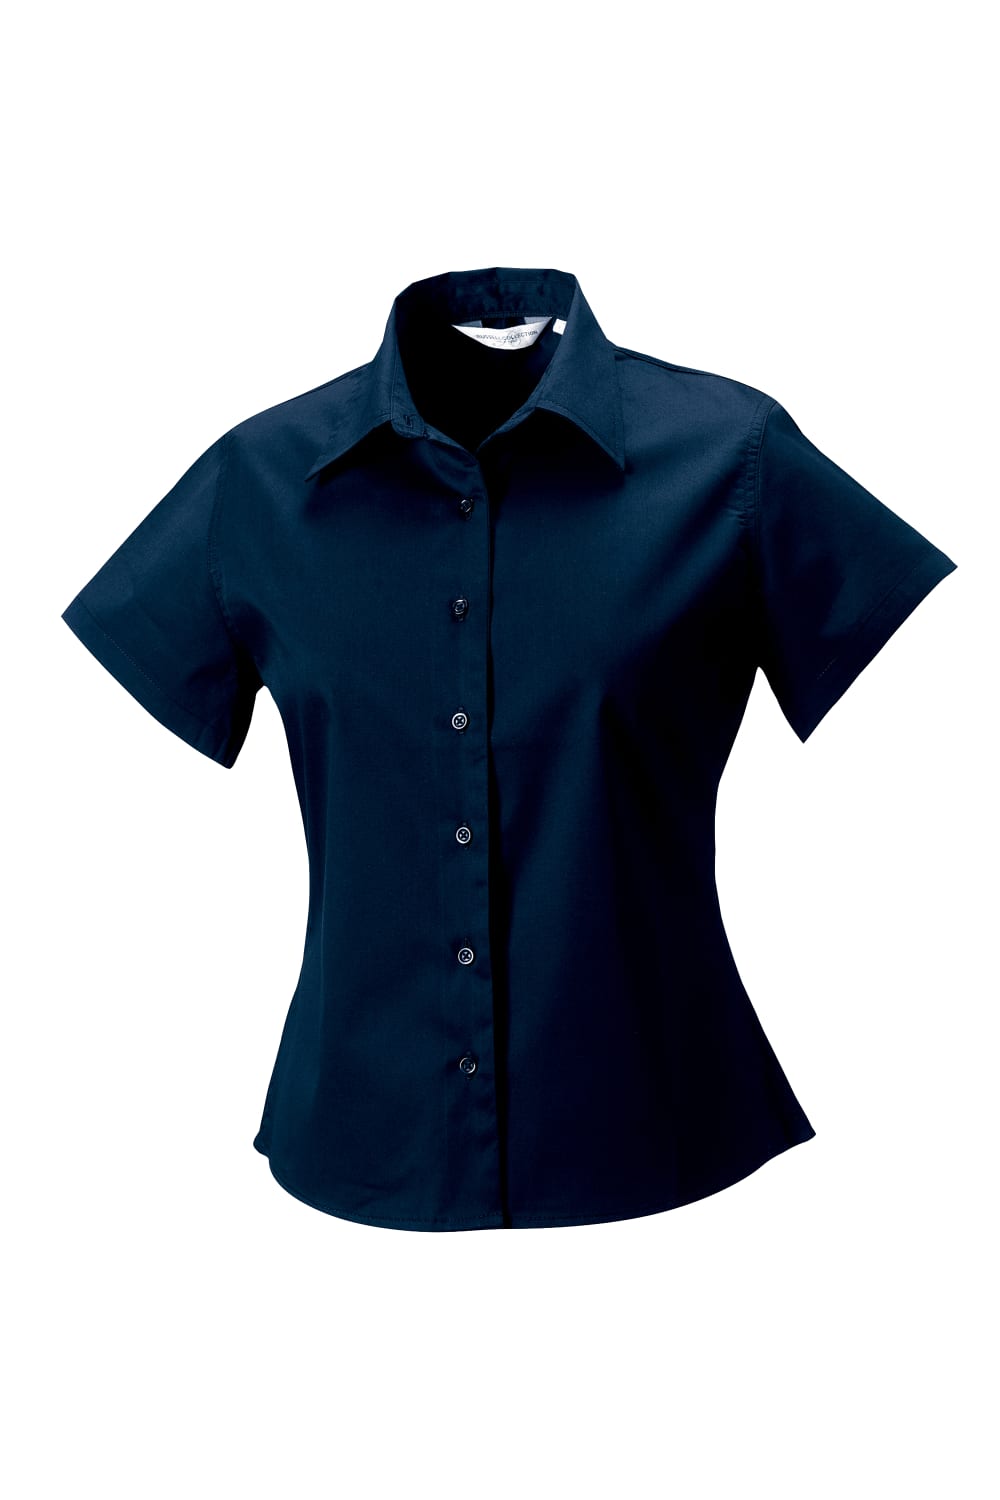 Russell Collection Womens/Ladies Short Sleeve Classic Twill Shirt (French Navy)